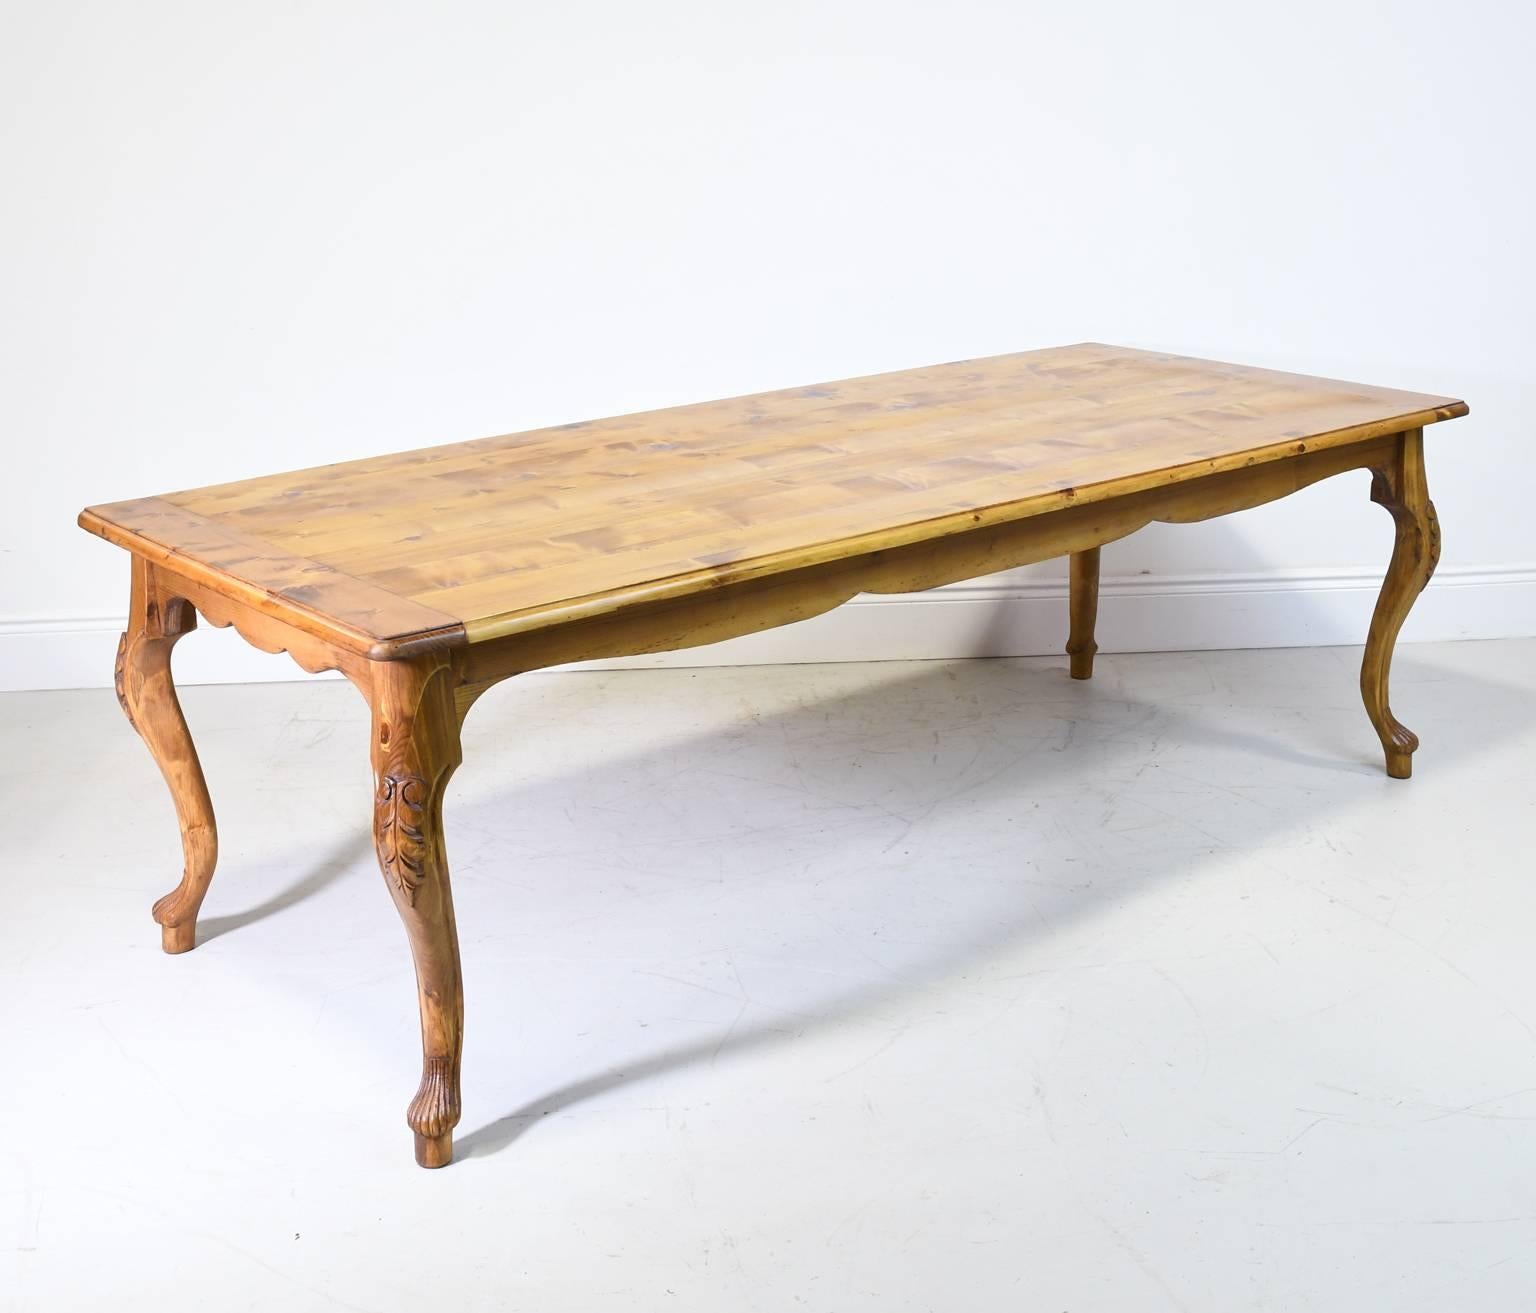 A pine farmhouse dining table in the French Provincial style with cabriole legs with carved acanthus leaf motif on the knees, and undulating apron. Hand-rubbed oil finish. Beautifully designed & solidly built in the Netherlands, circa